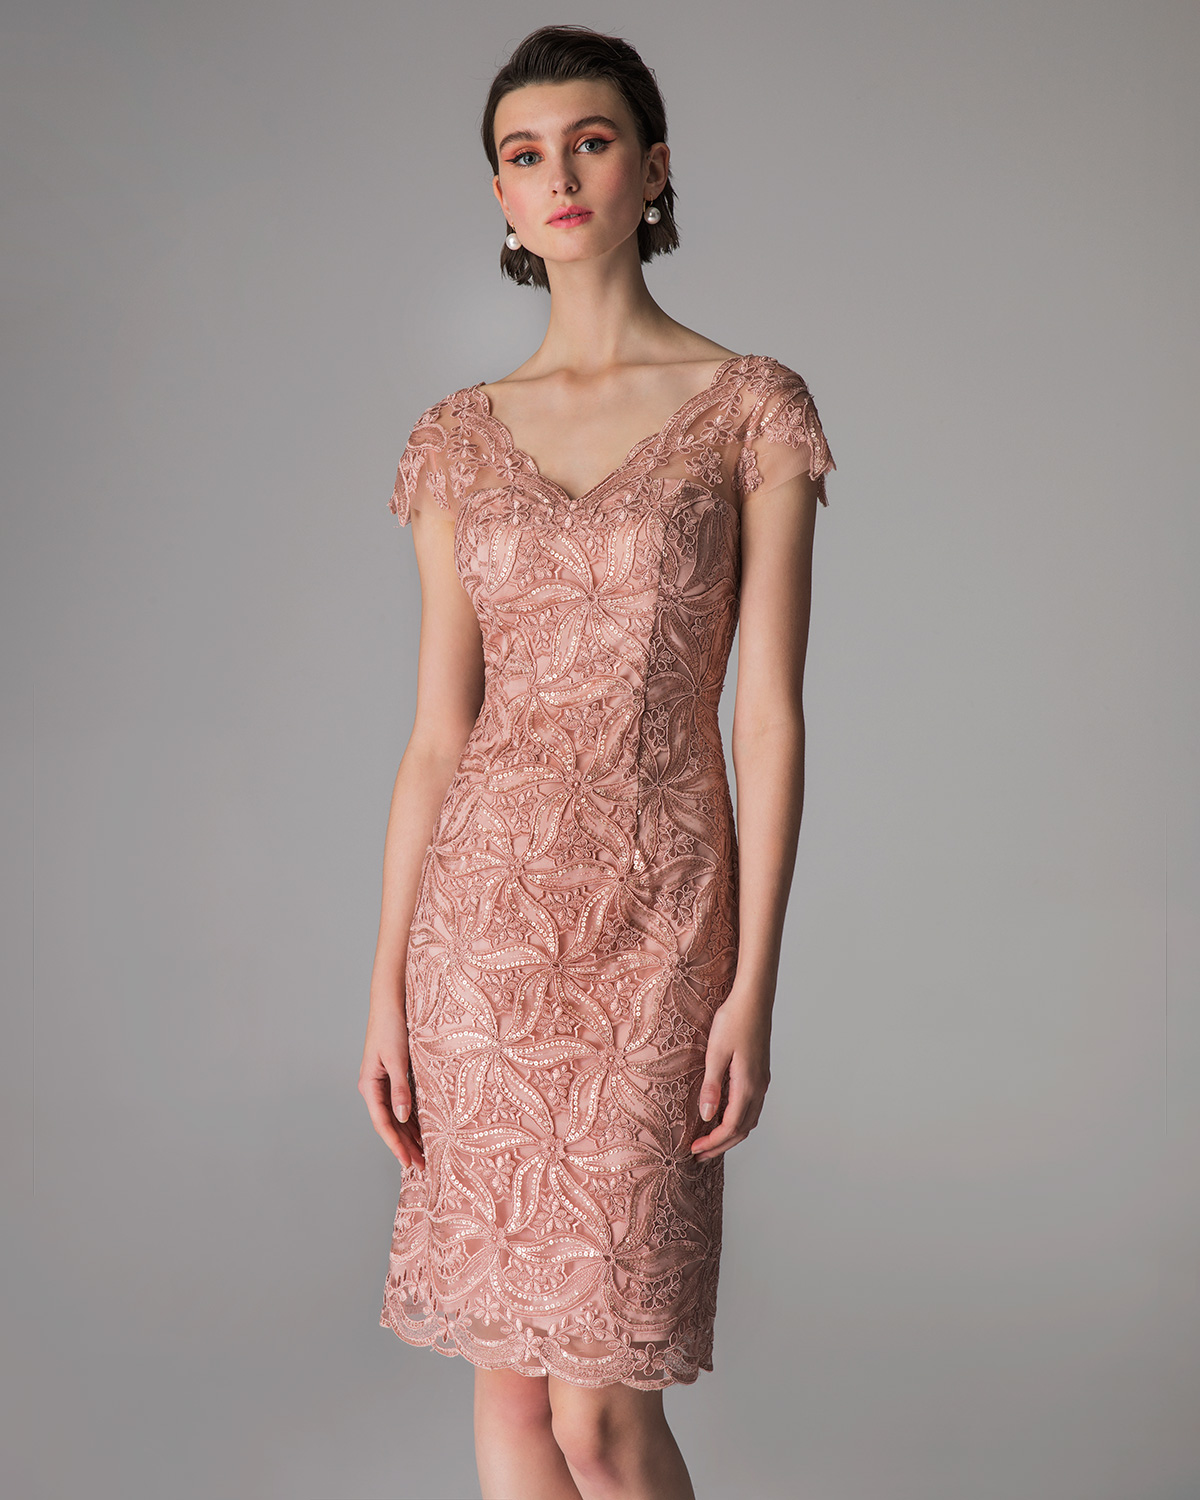 Classic Dresses / Short evening lace dress with short sleeves